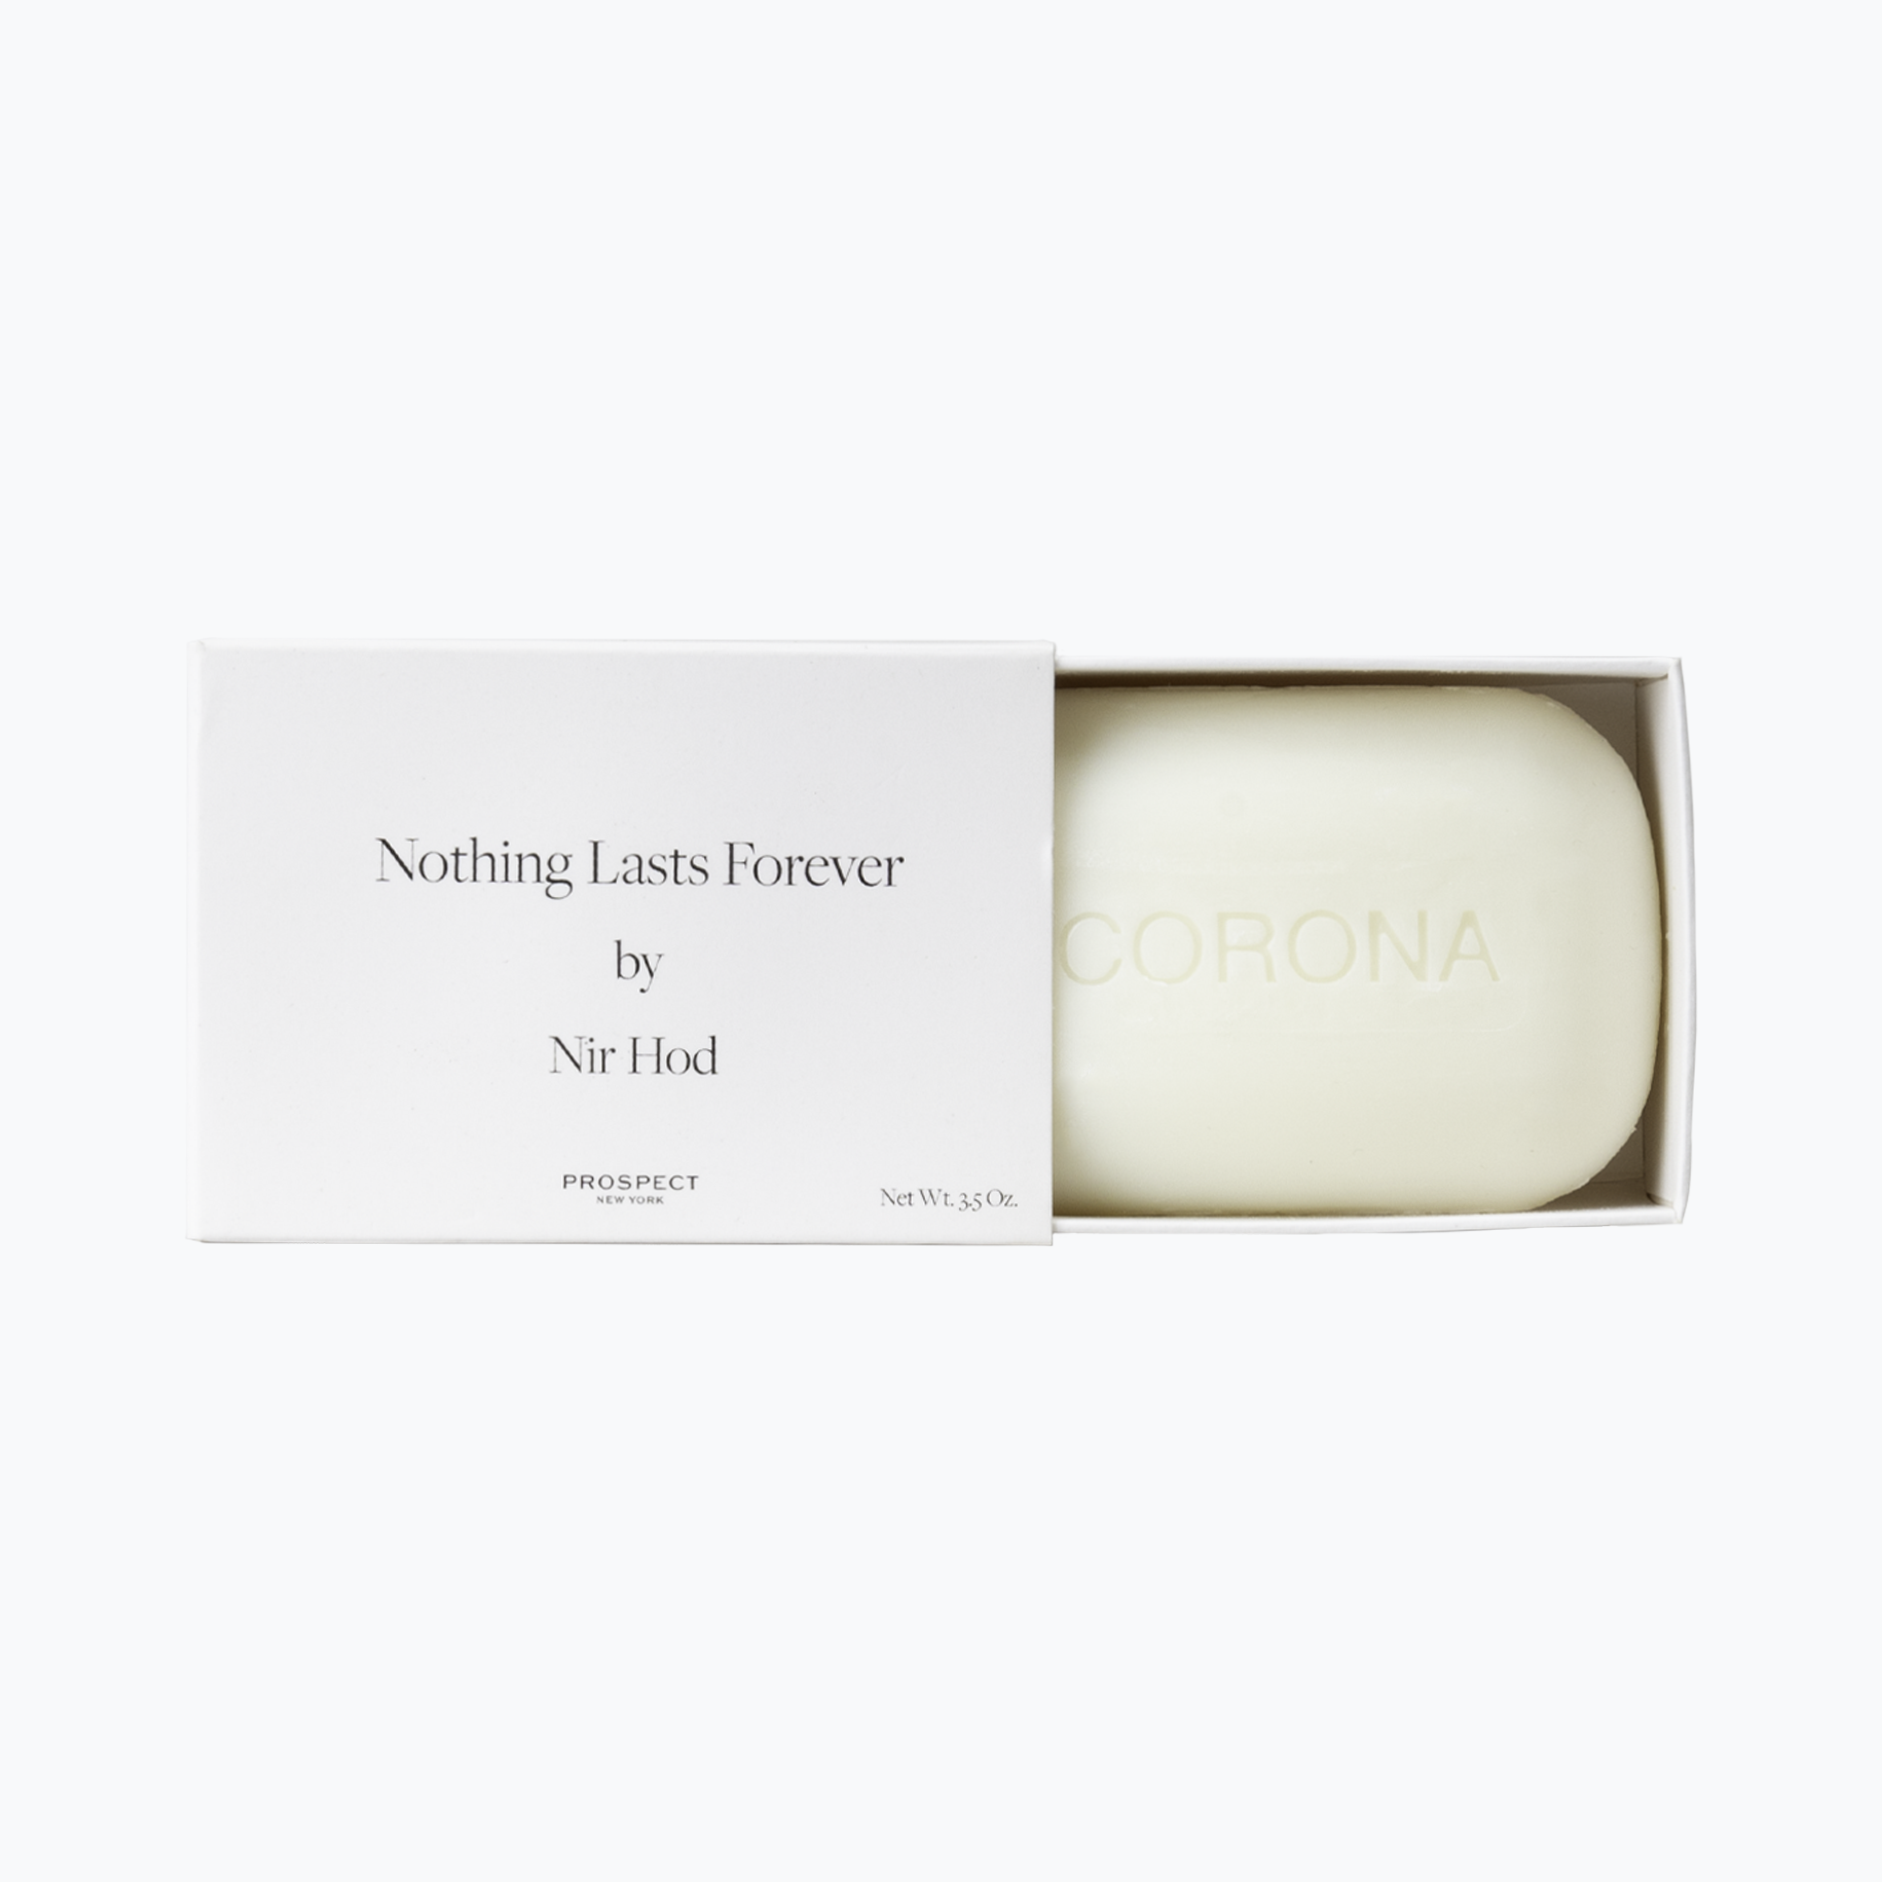 'Nothing Lasts Forever' Soap by Nir Hod